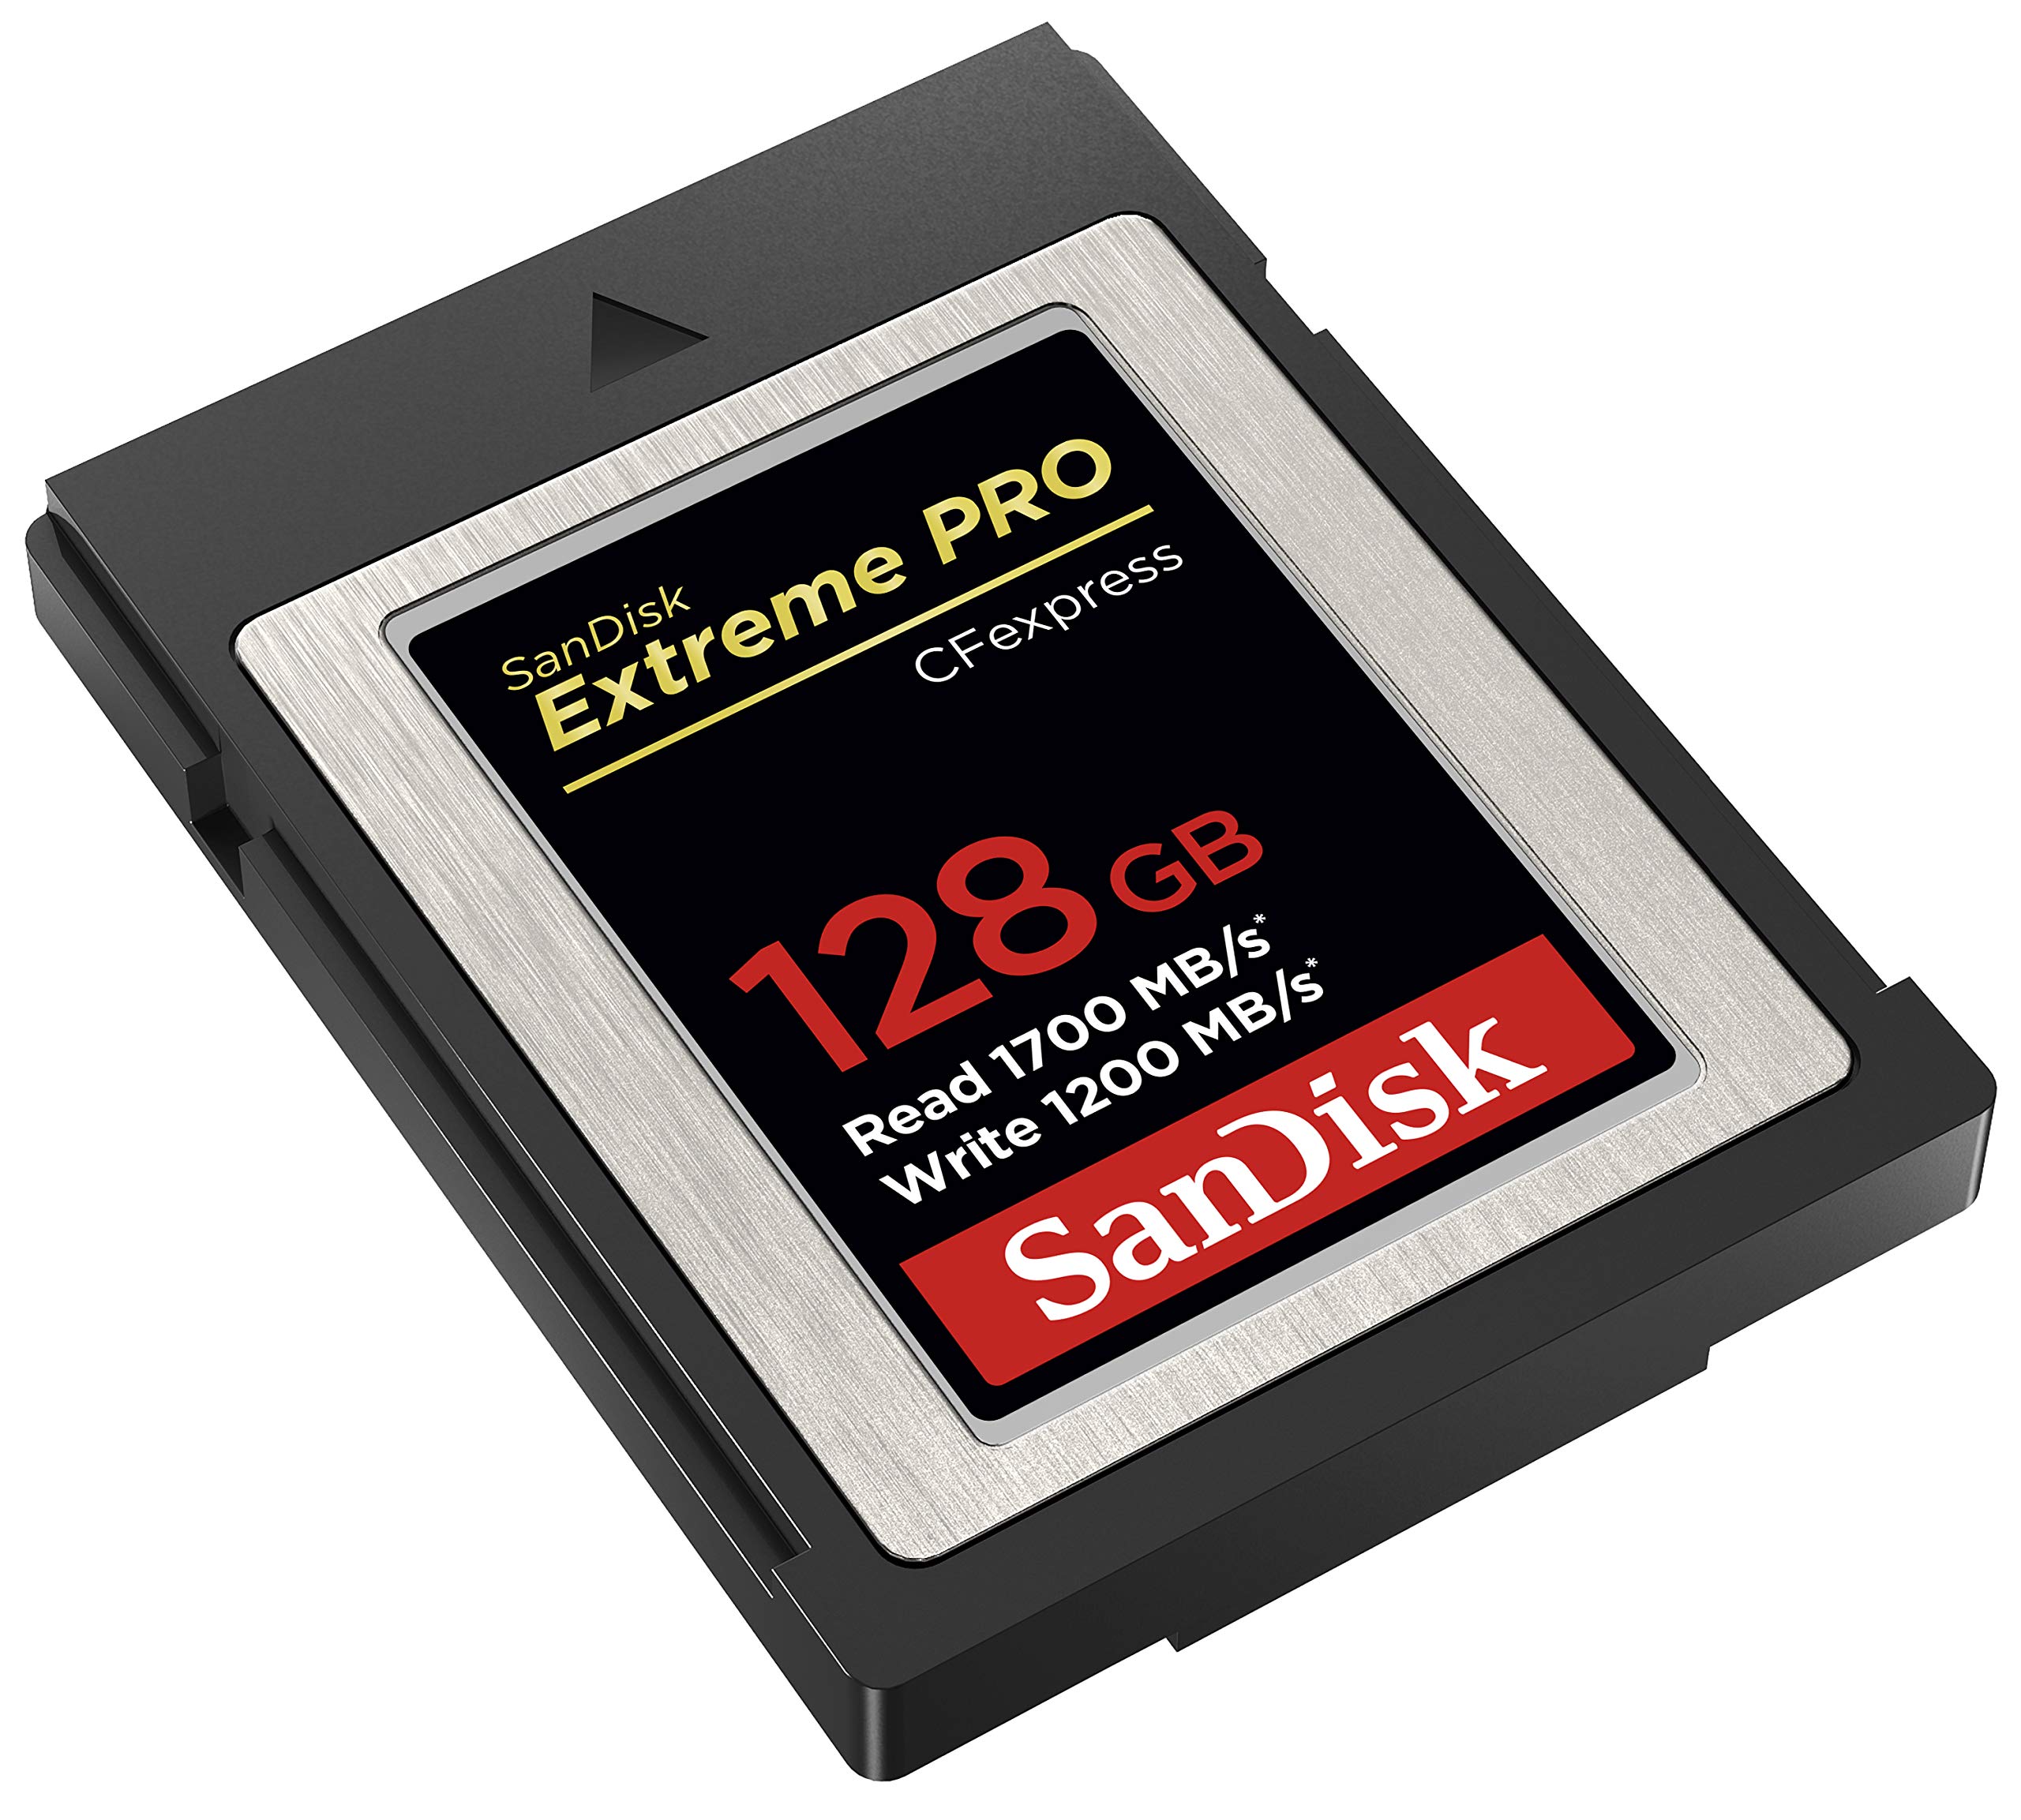 SanDisk 128GB Extreme PRO CFexpress Card Type B - SDCFE-128G-GN4NN